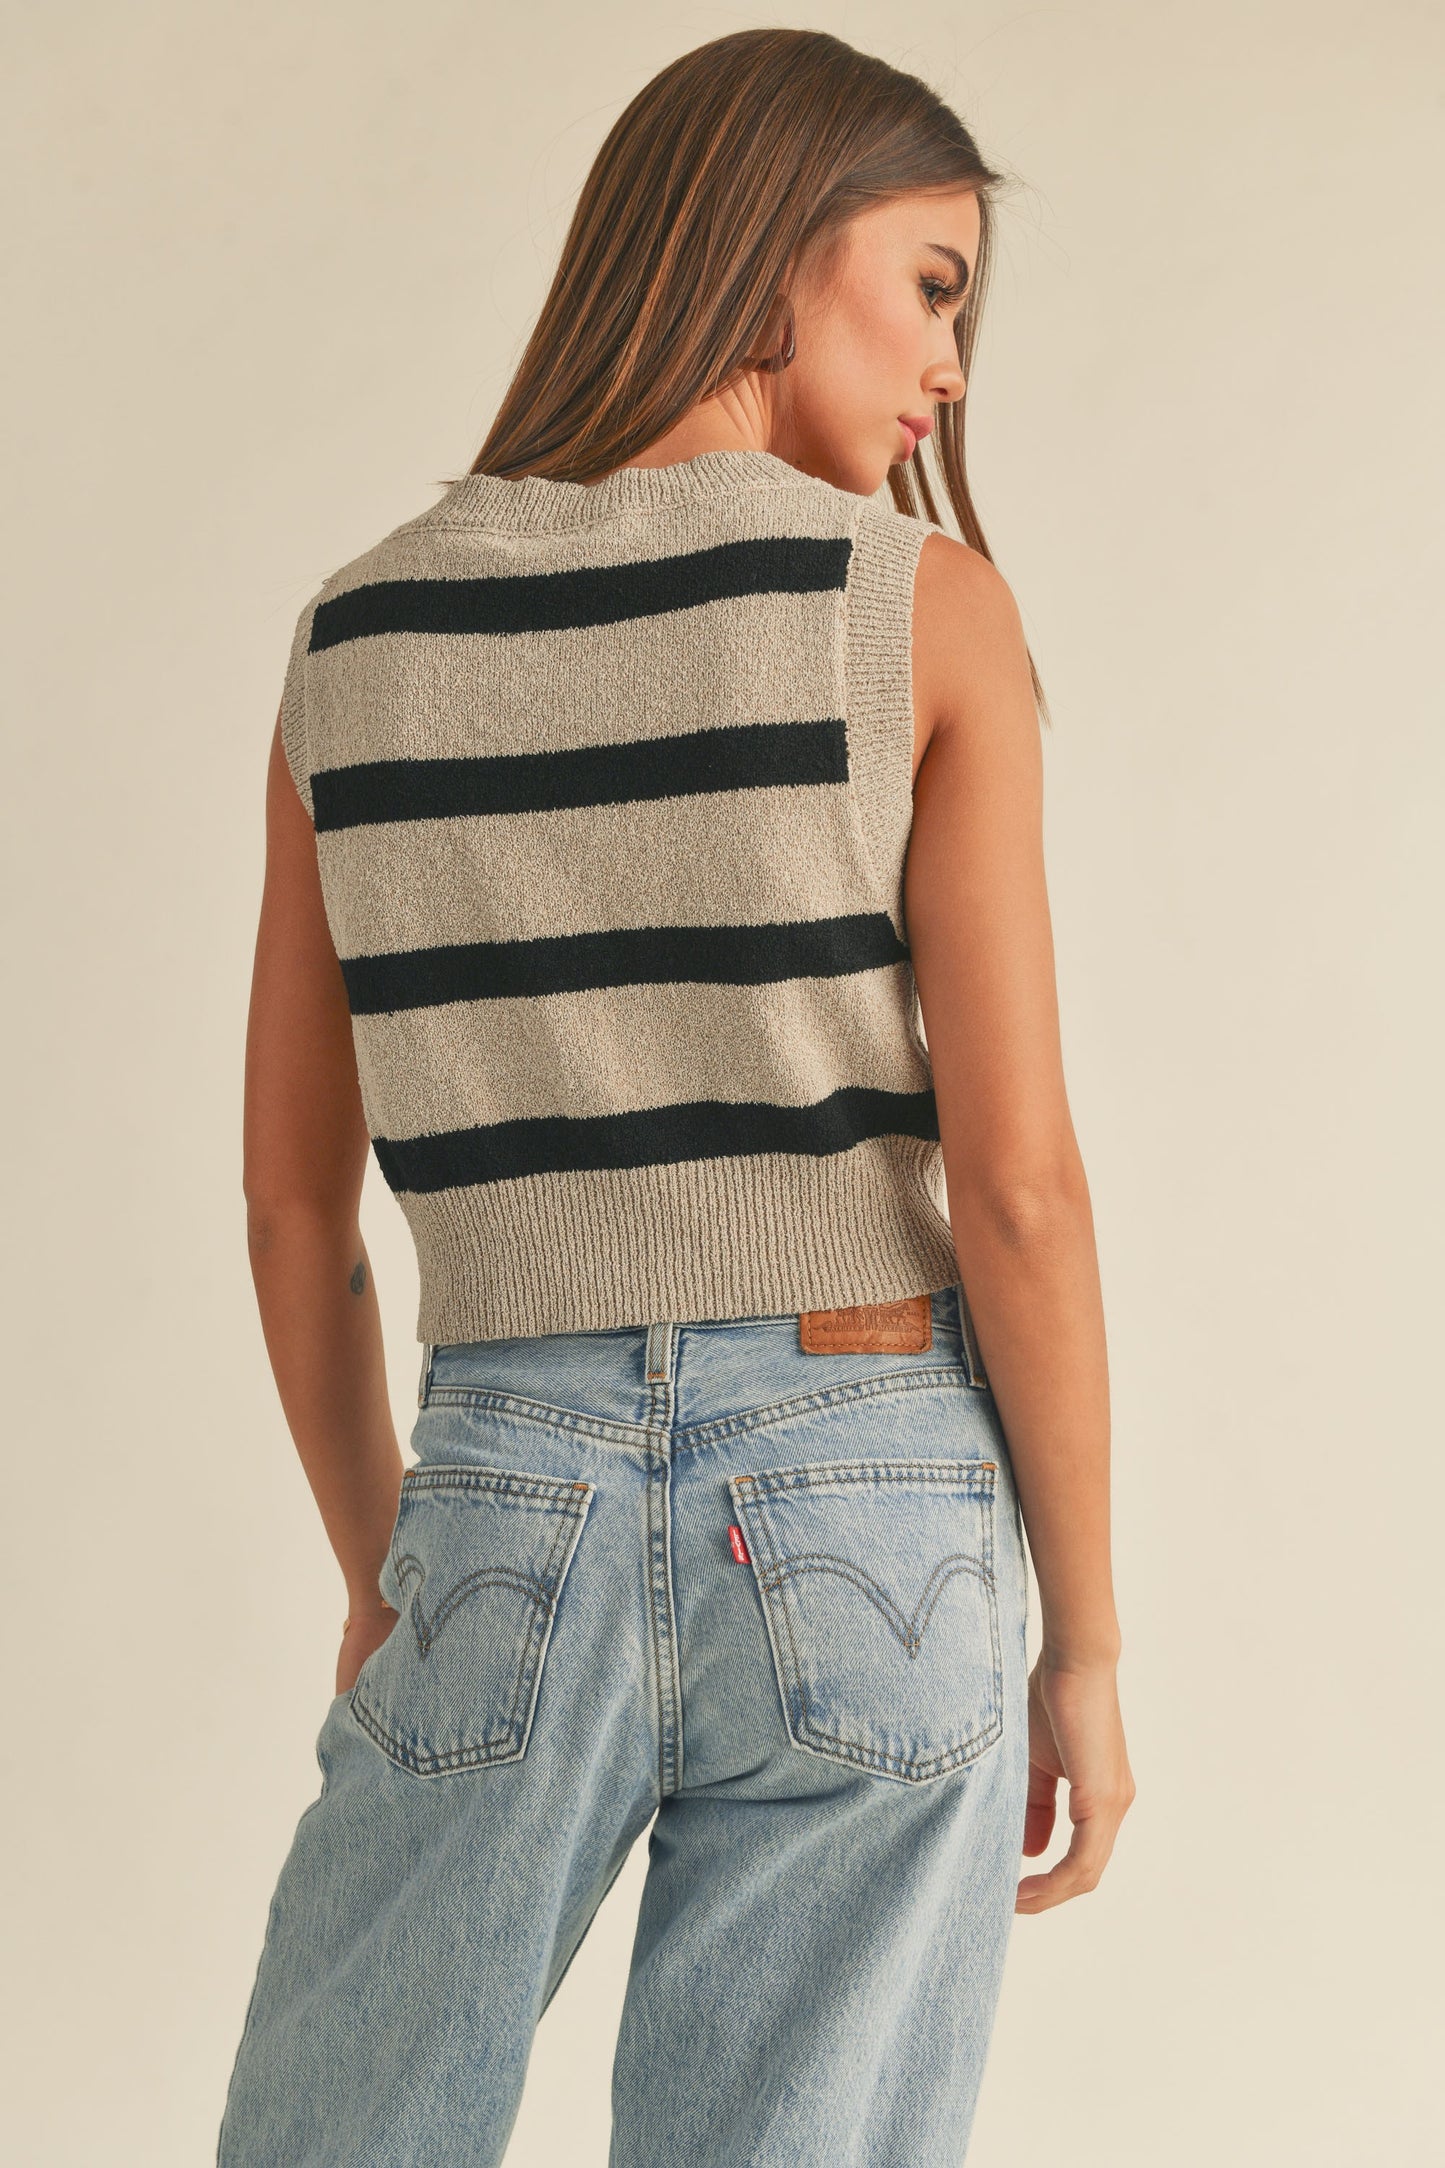 Hartley Striped Vest in Stone